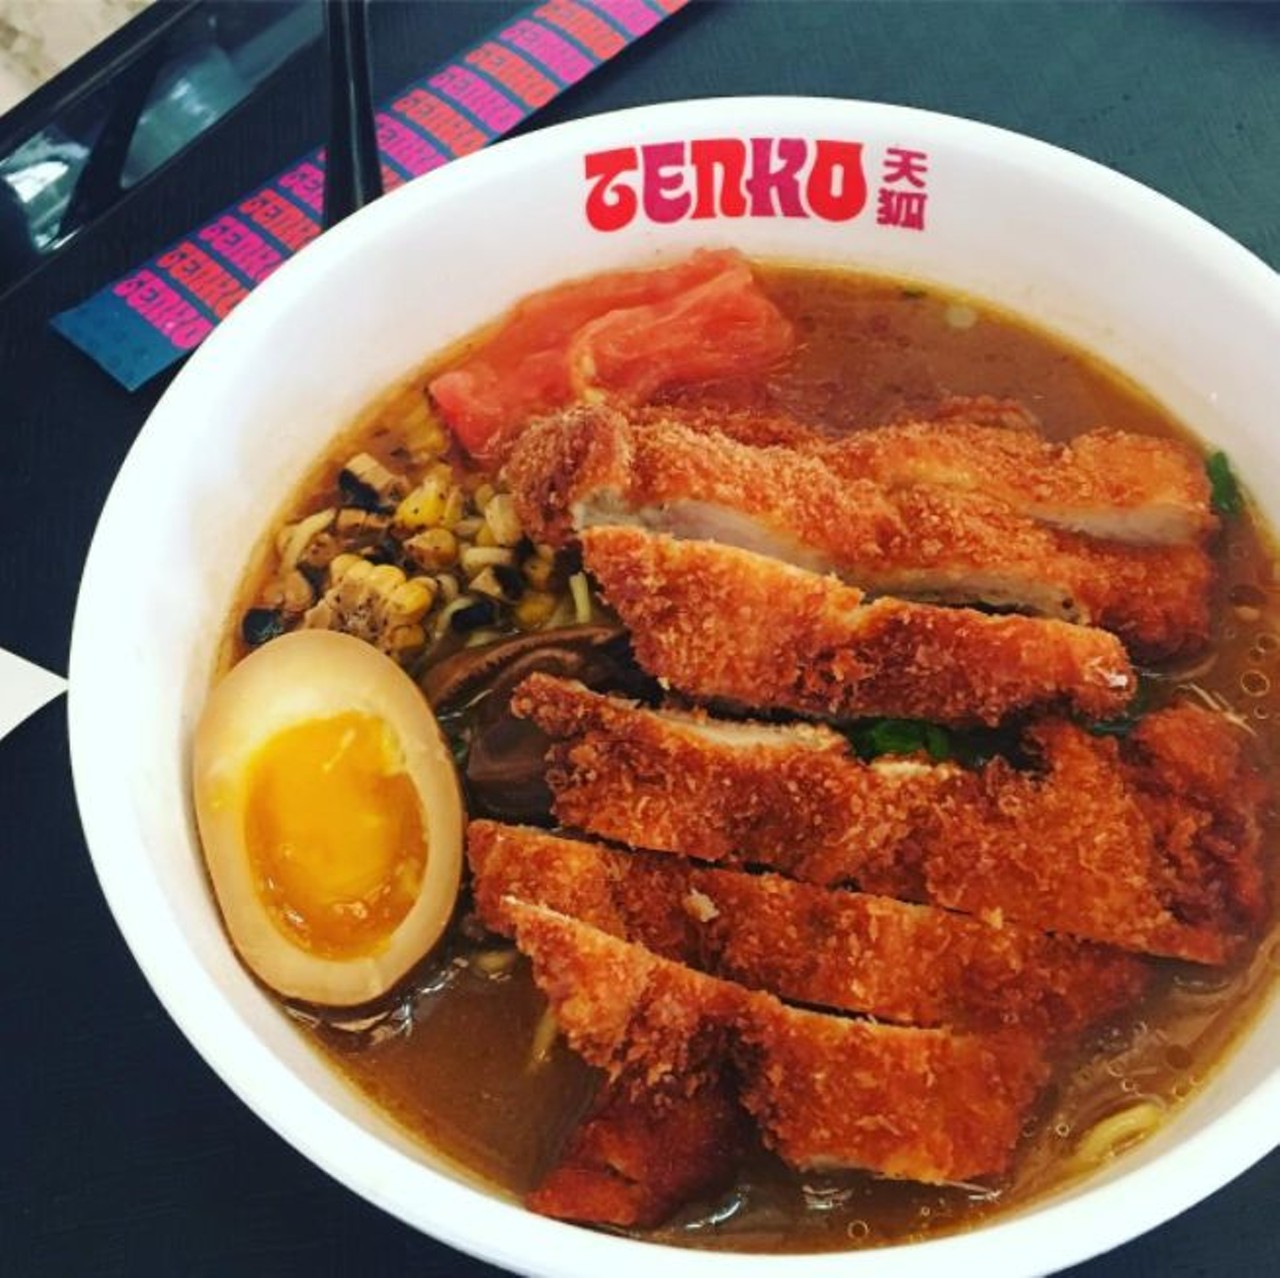 Tenko Ramen 
312 Pearl Pkwy., tenkoramen.com
At Tenko Ramen, you can taste so many mouthwatering, savory flavors in a single bowl. Their menu items include a wide selection of add-ons, so you can really make your ramen experience unique.  
Photo via Instagram,  tenkoramen